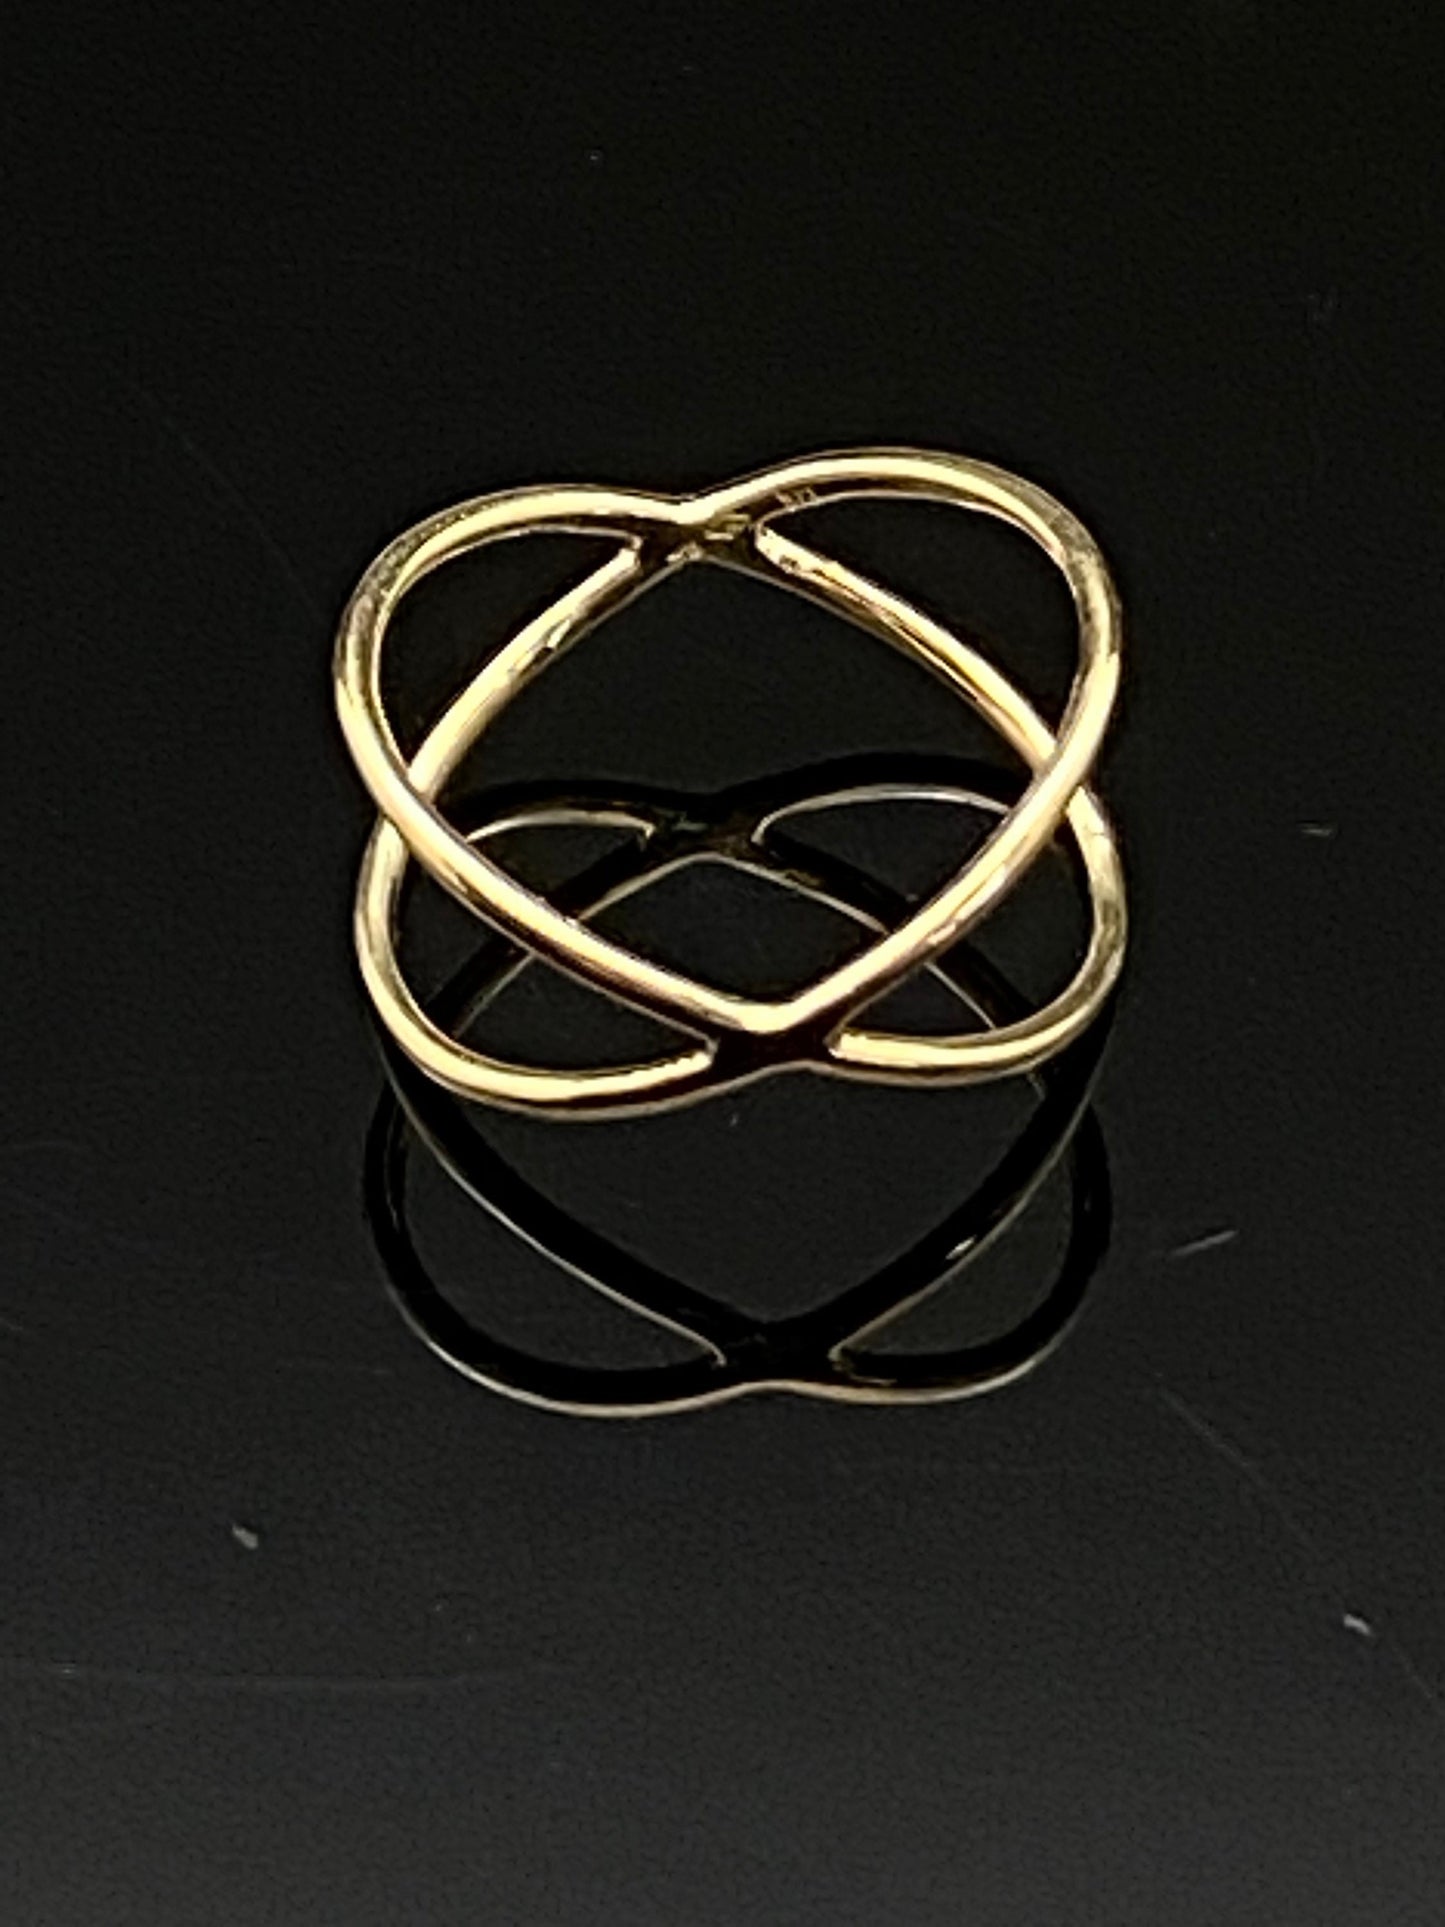 Yellow Gold Cris Cross Crossover Statement Ring